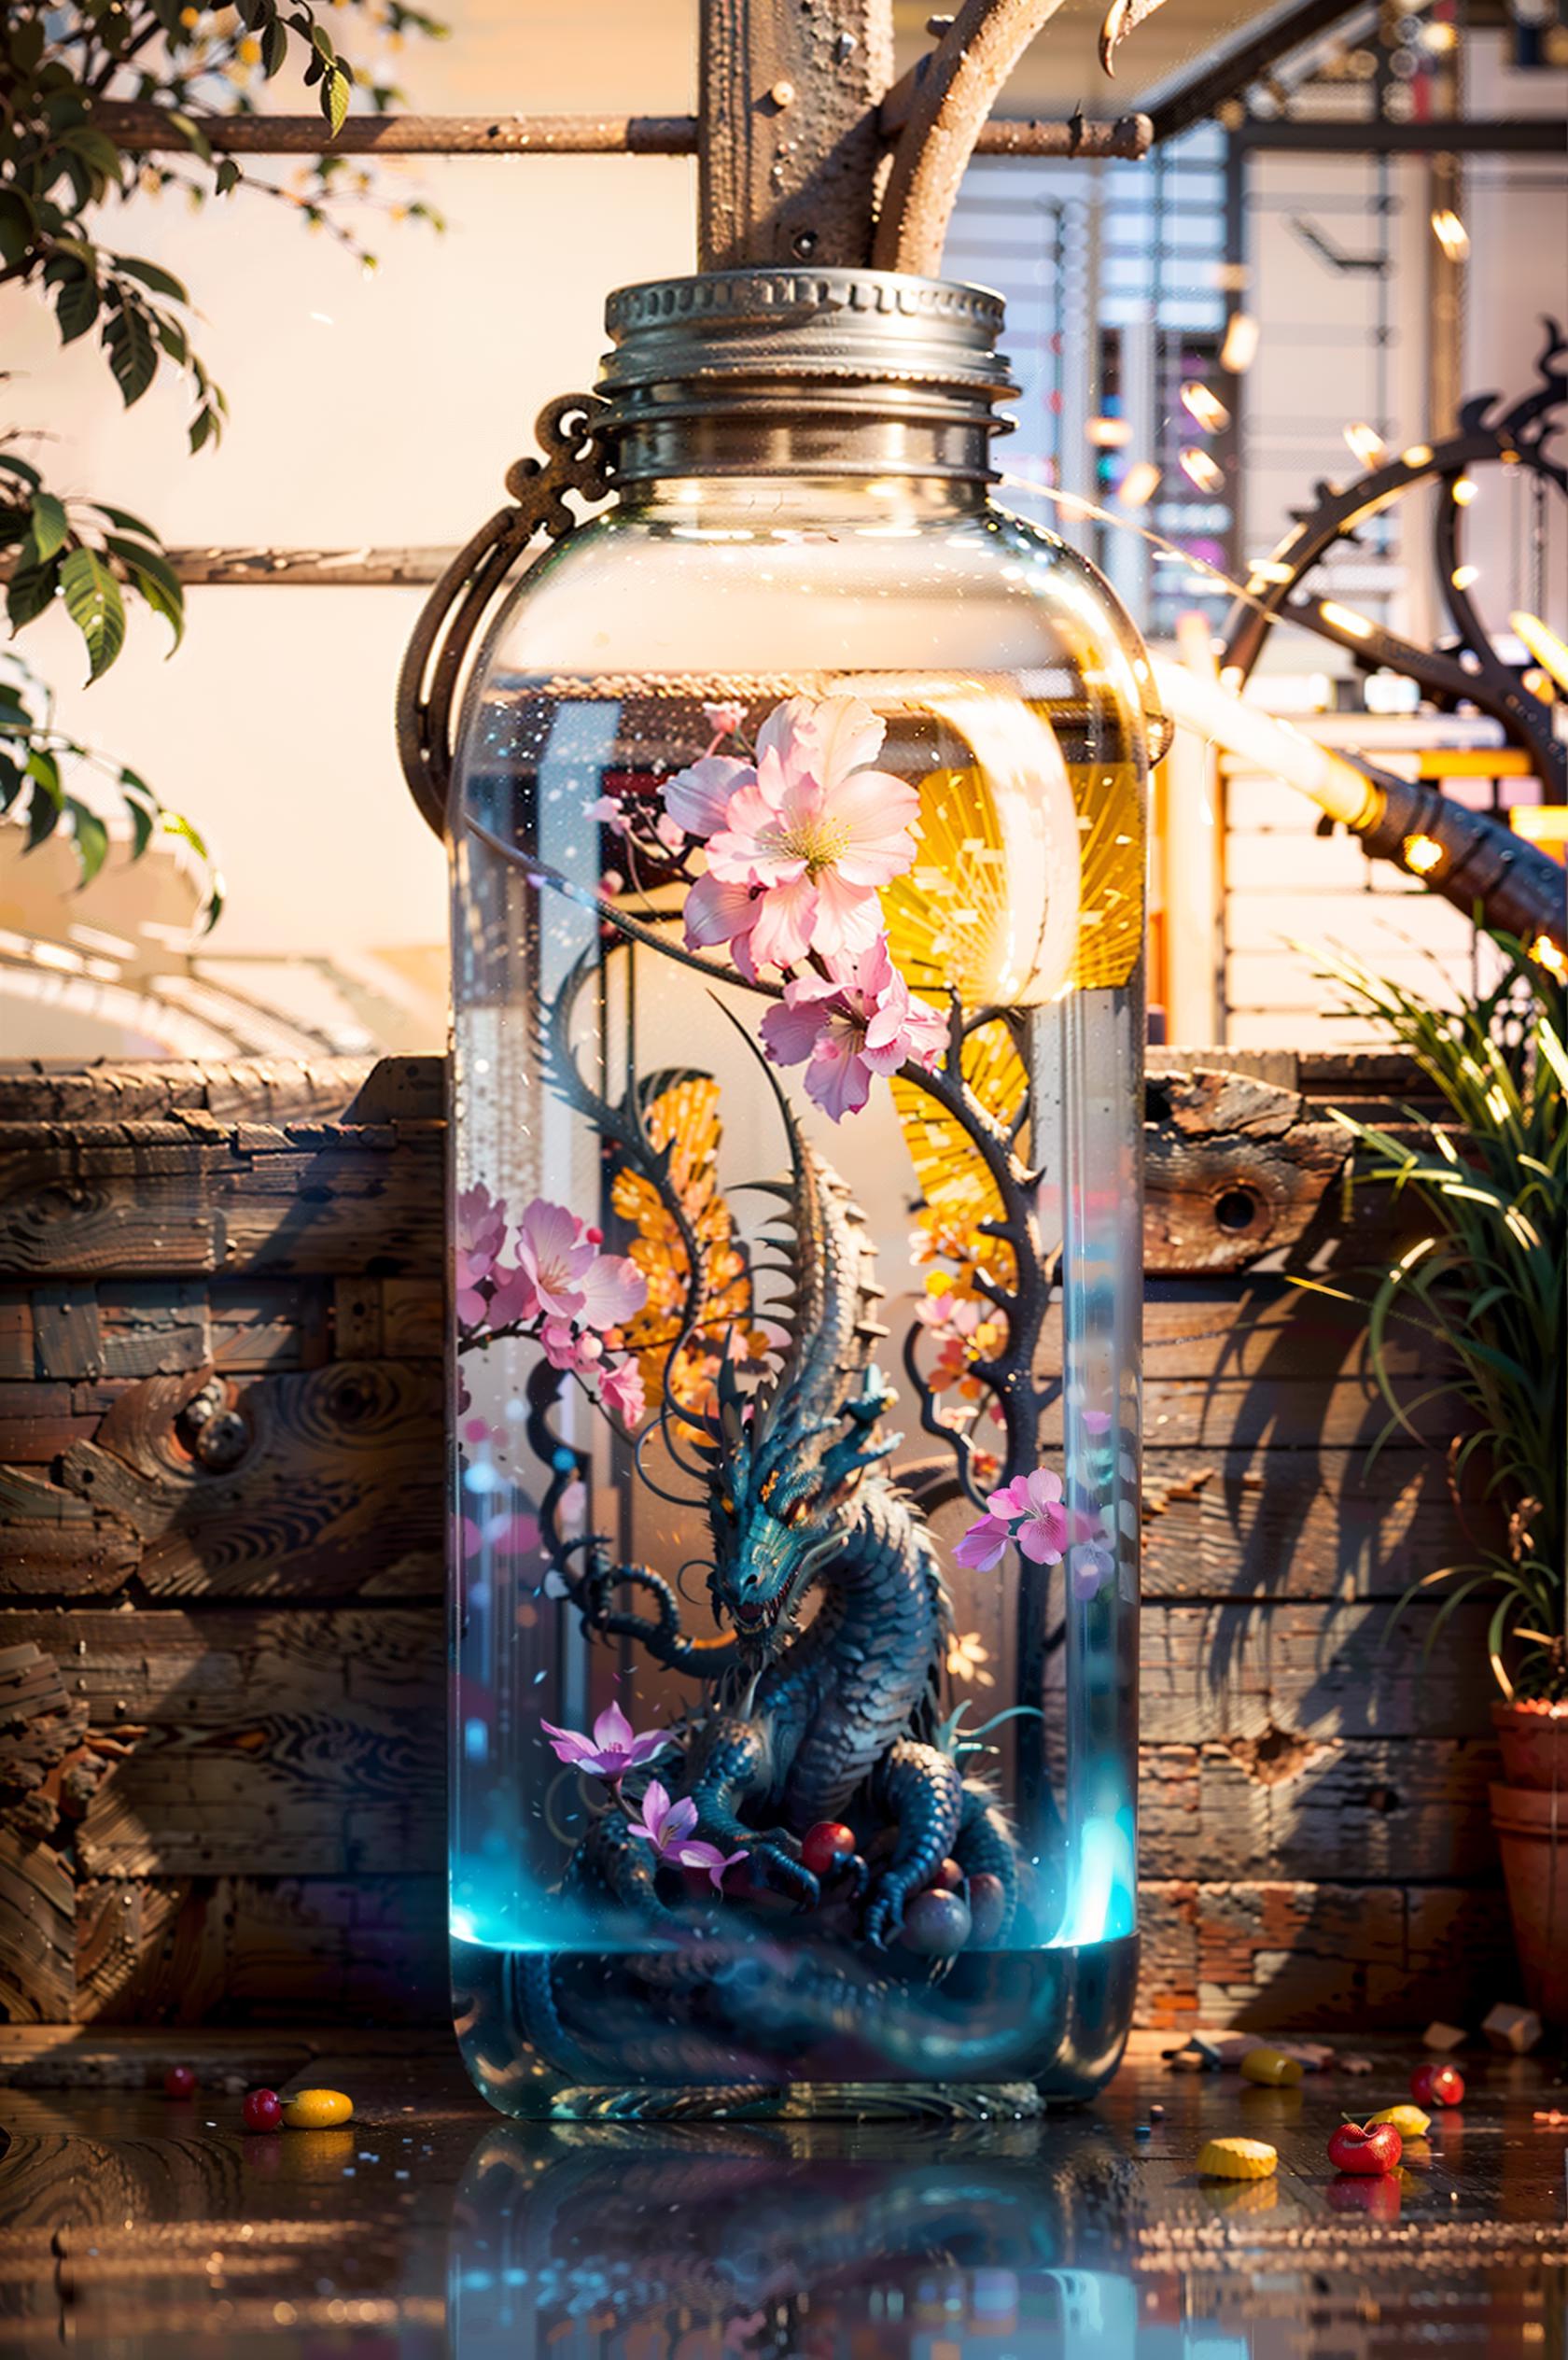 Girl in the Bottle (瓶中少女） - LoCon image by royalcreed